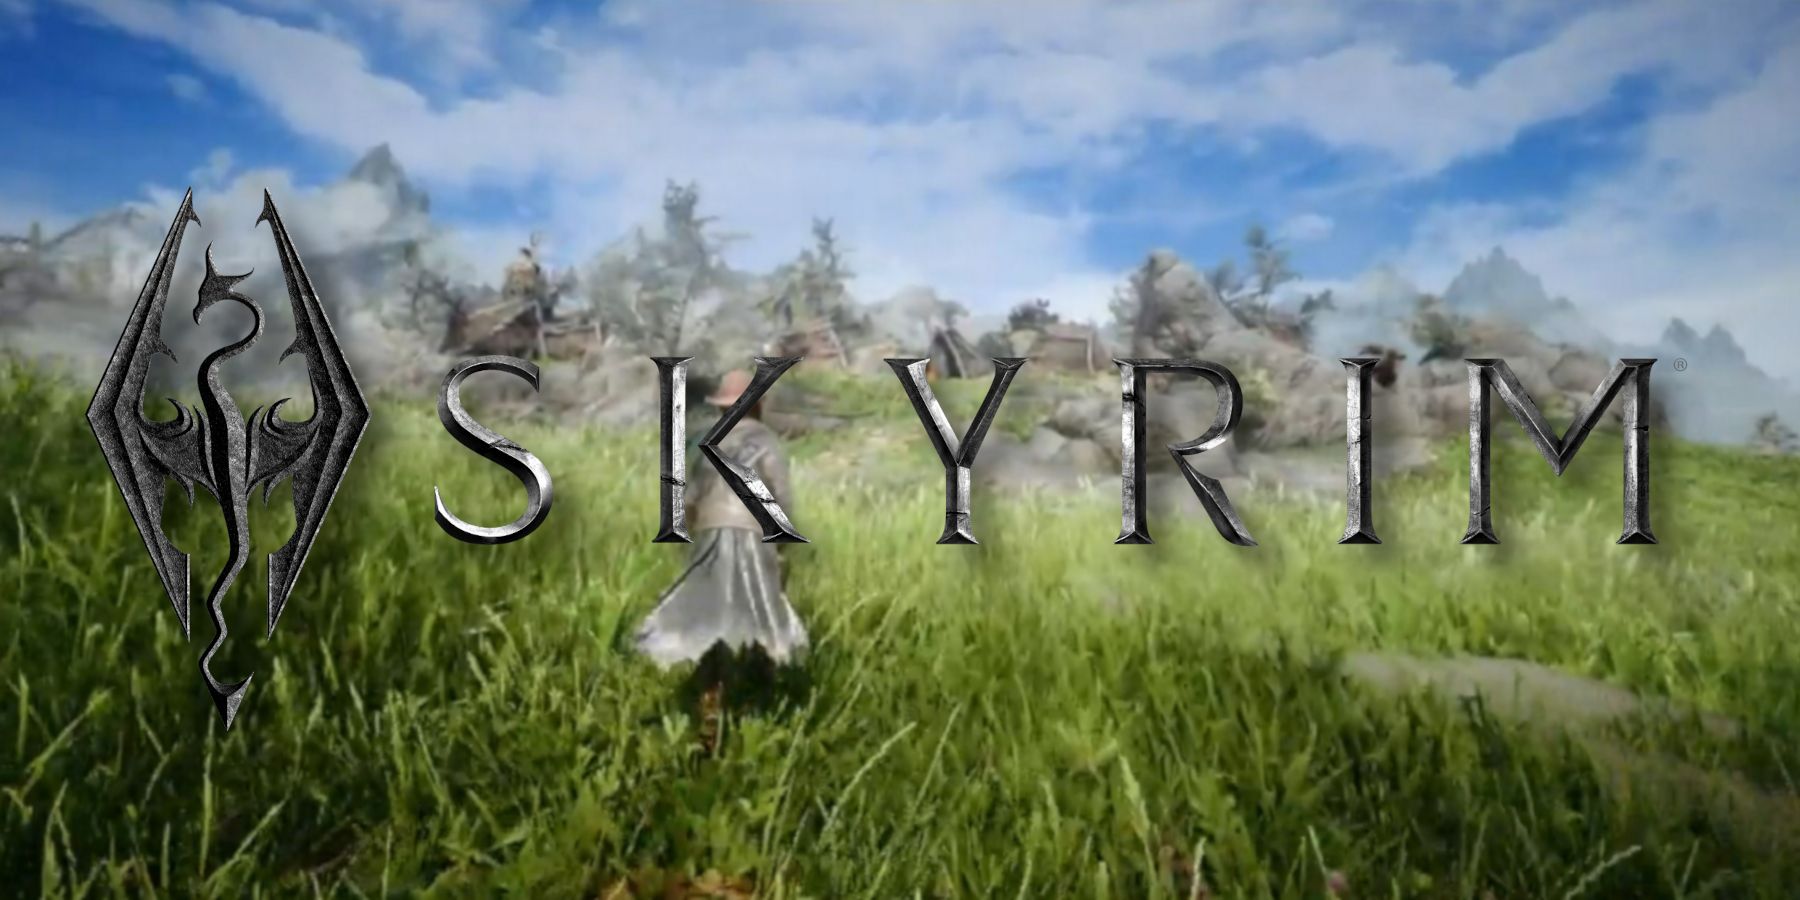 The Skyrim logo in the center with a screenshot from the game in the background.